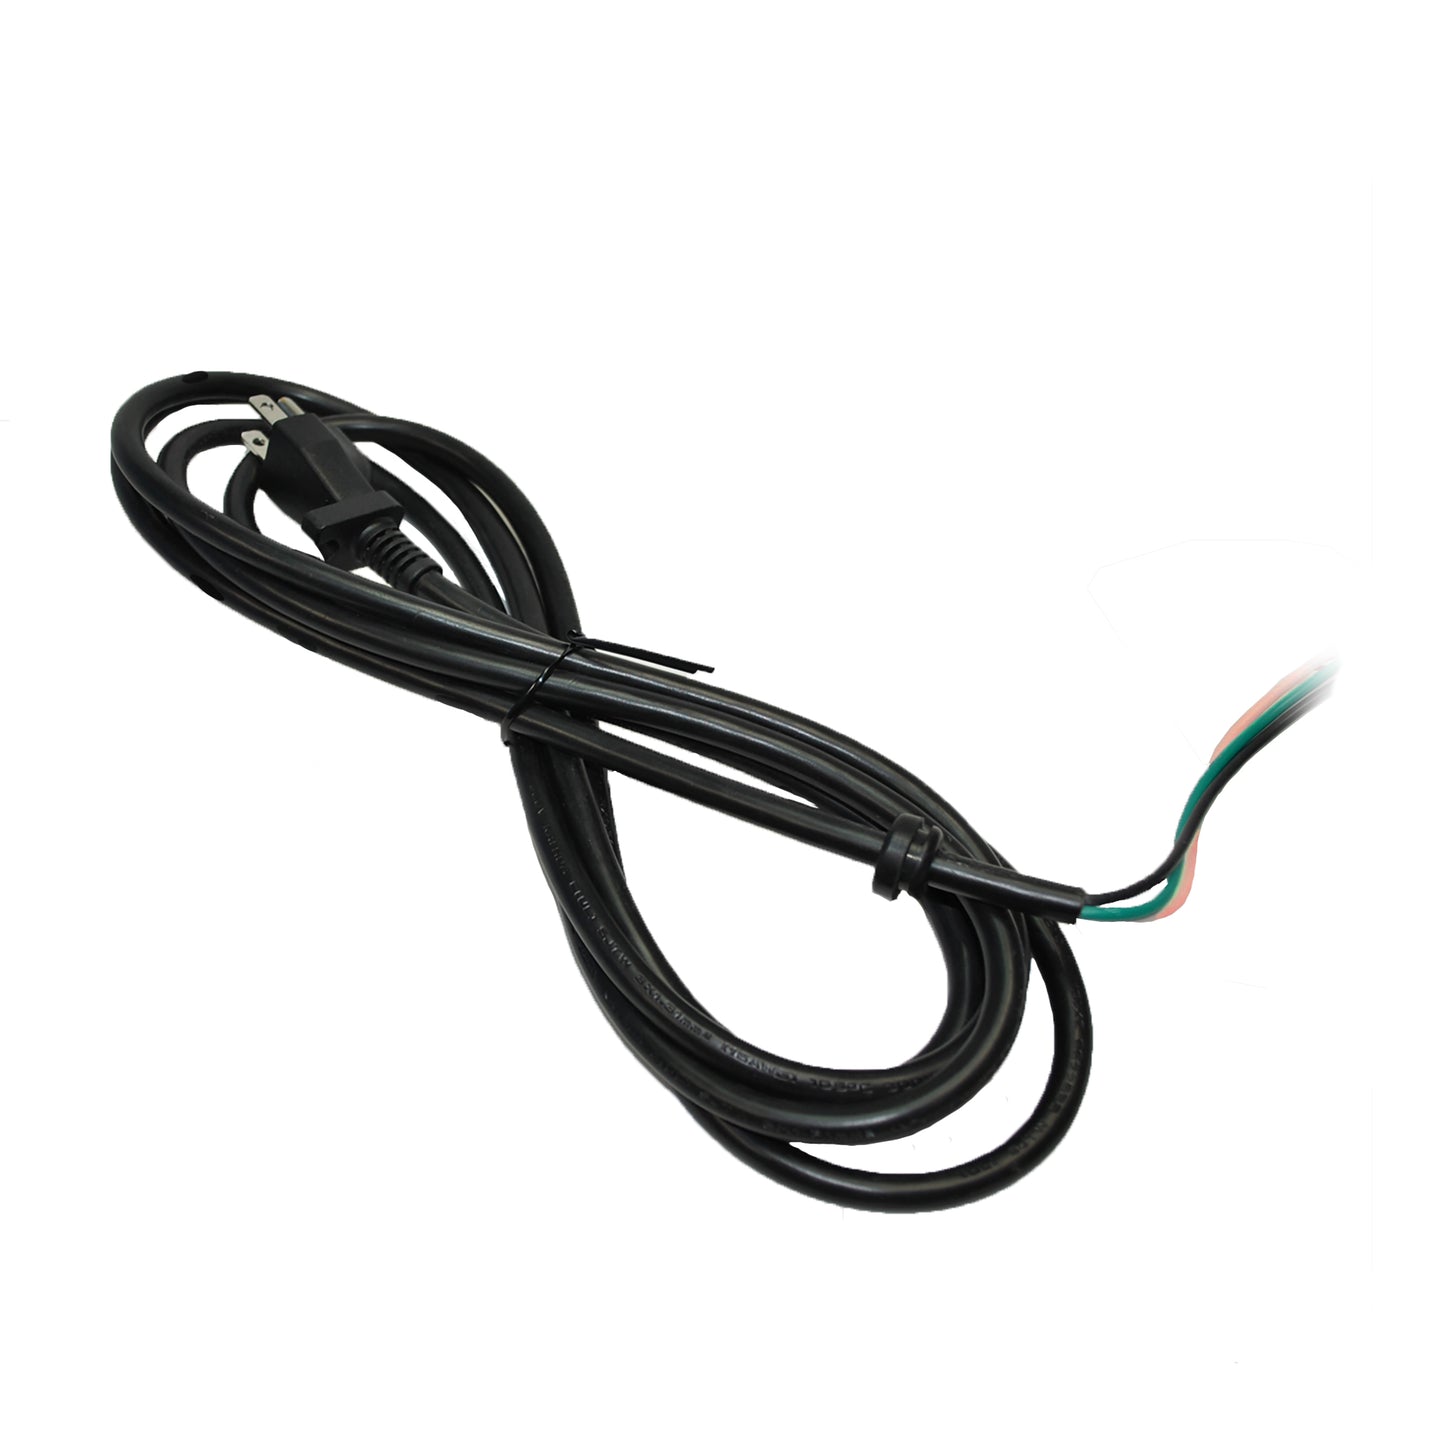 Power Cord for X-400 Air Mover